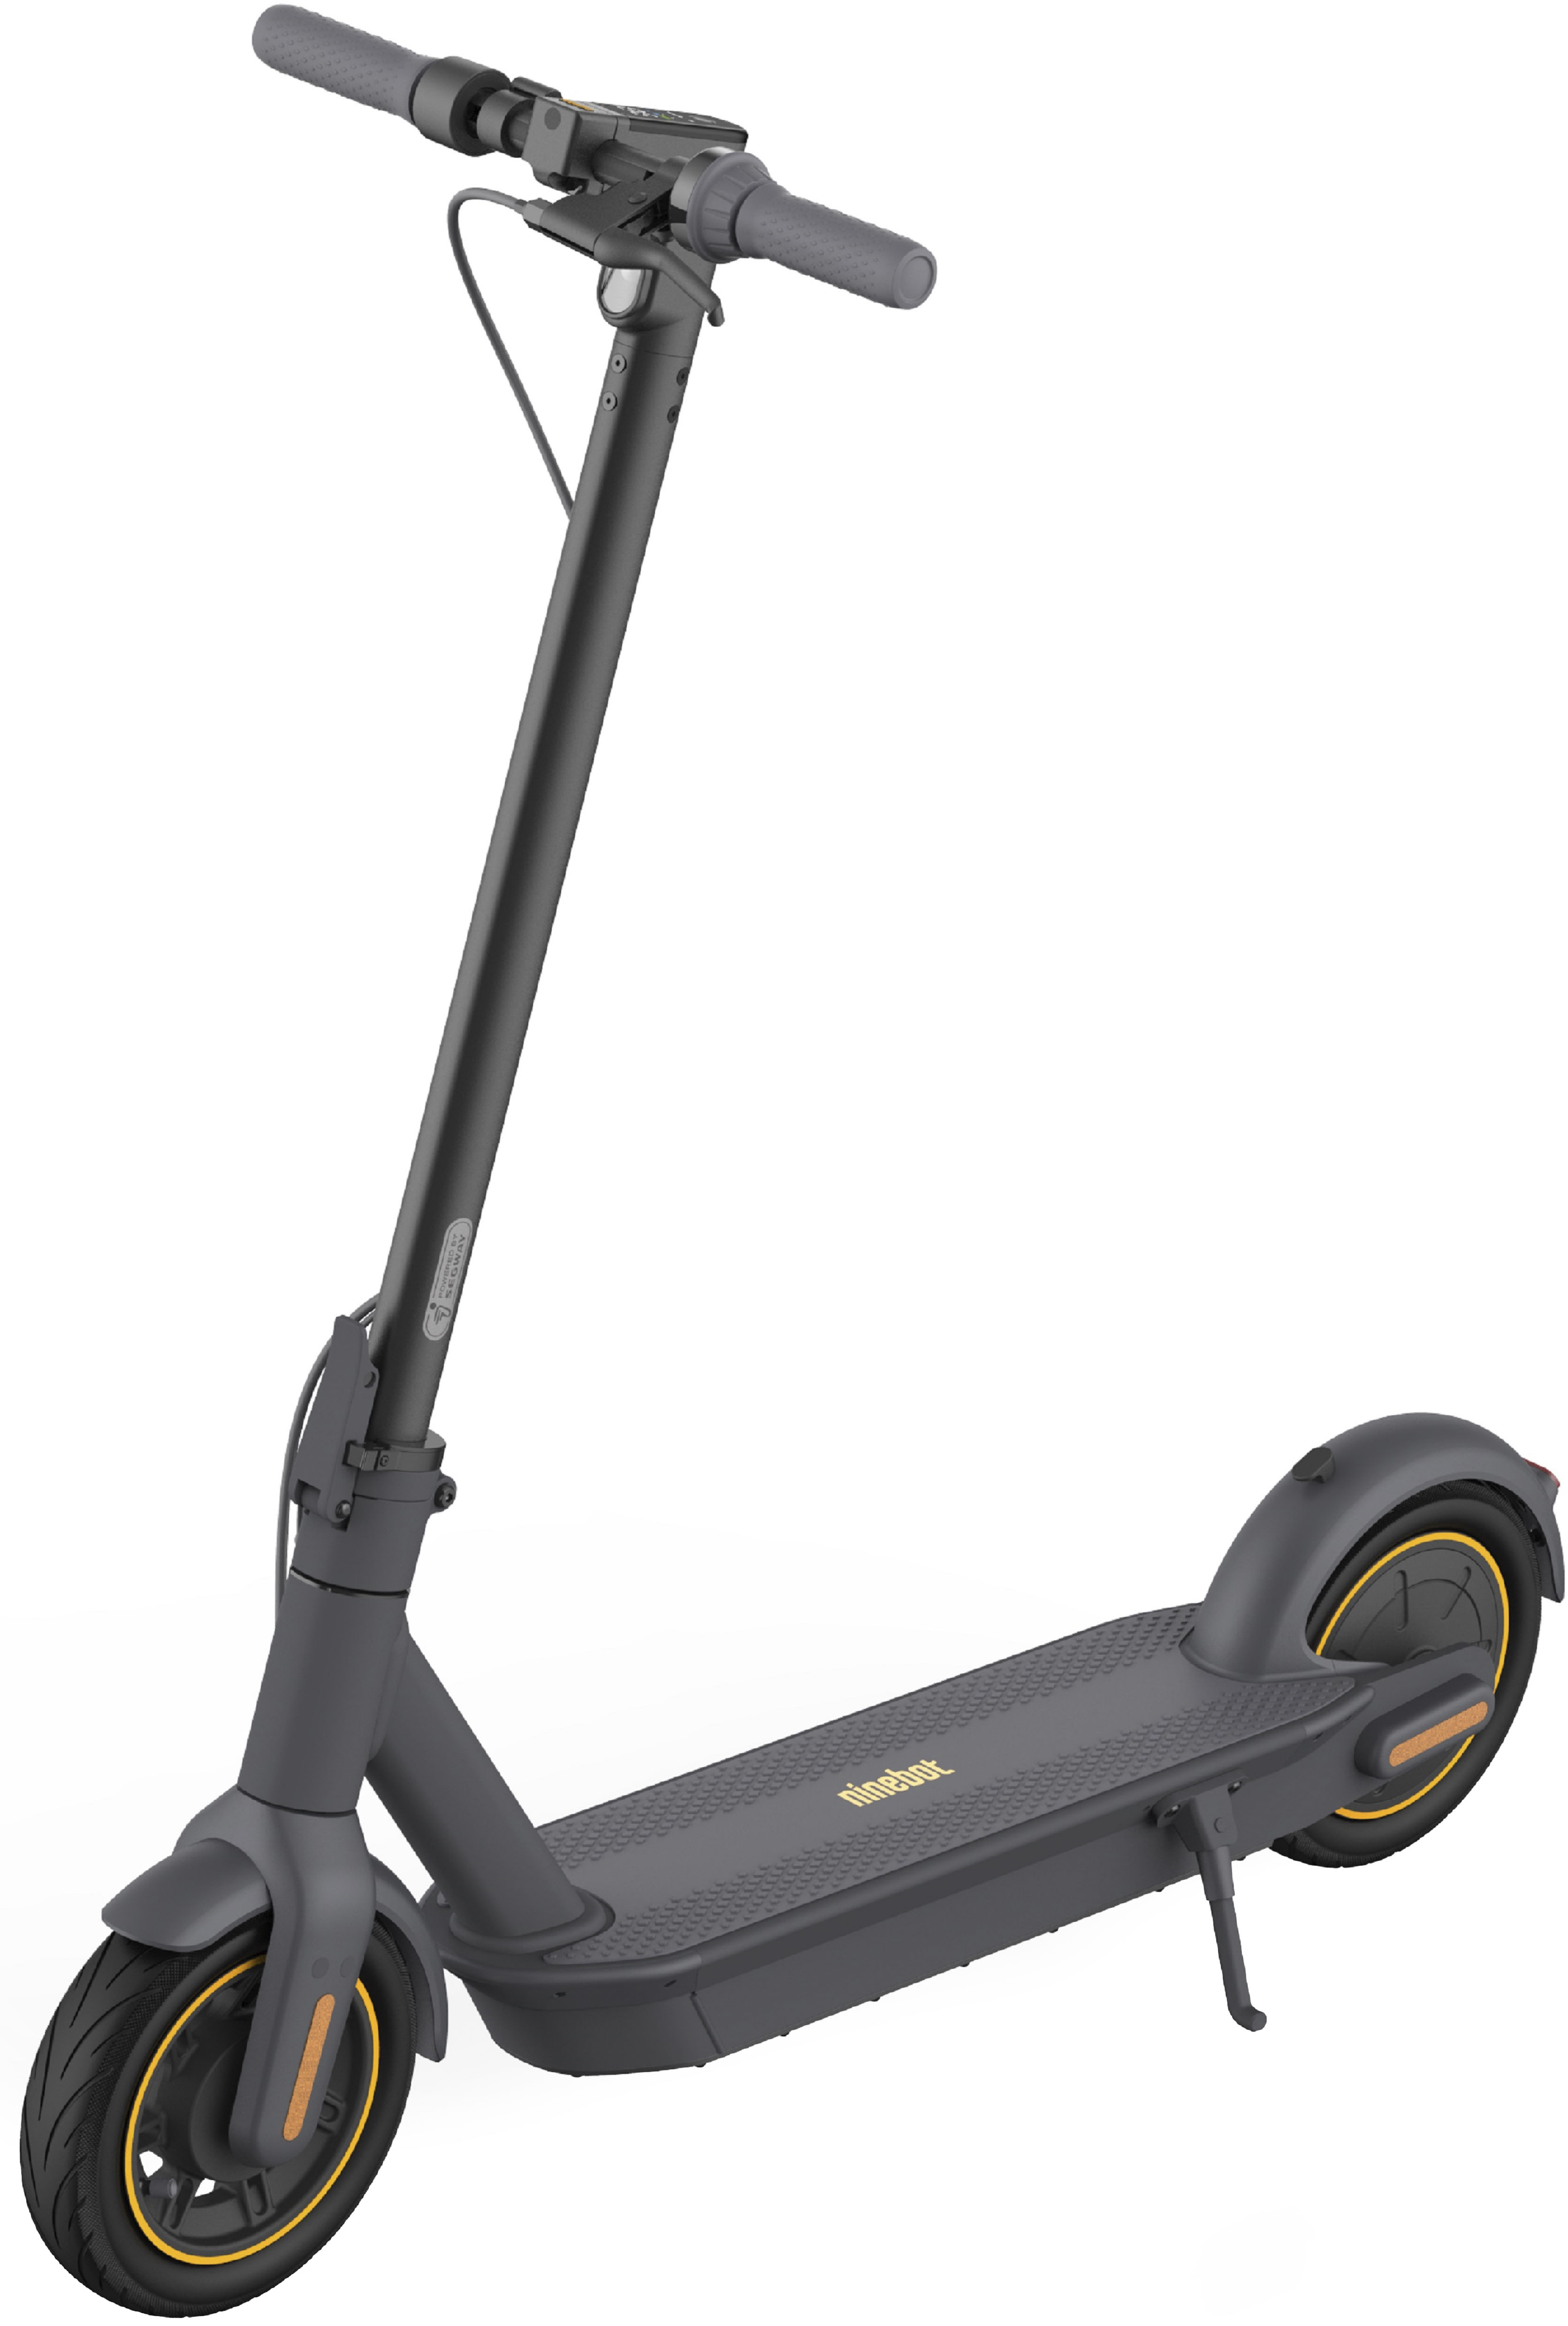 Scoover Electric Kick Scooter 